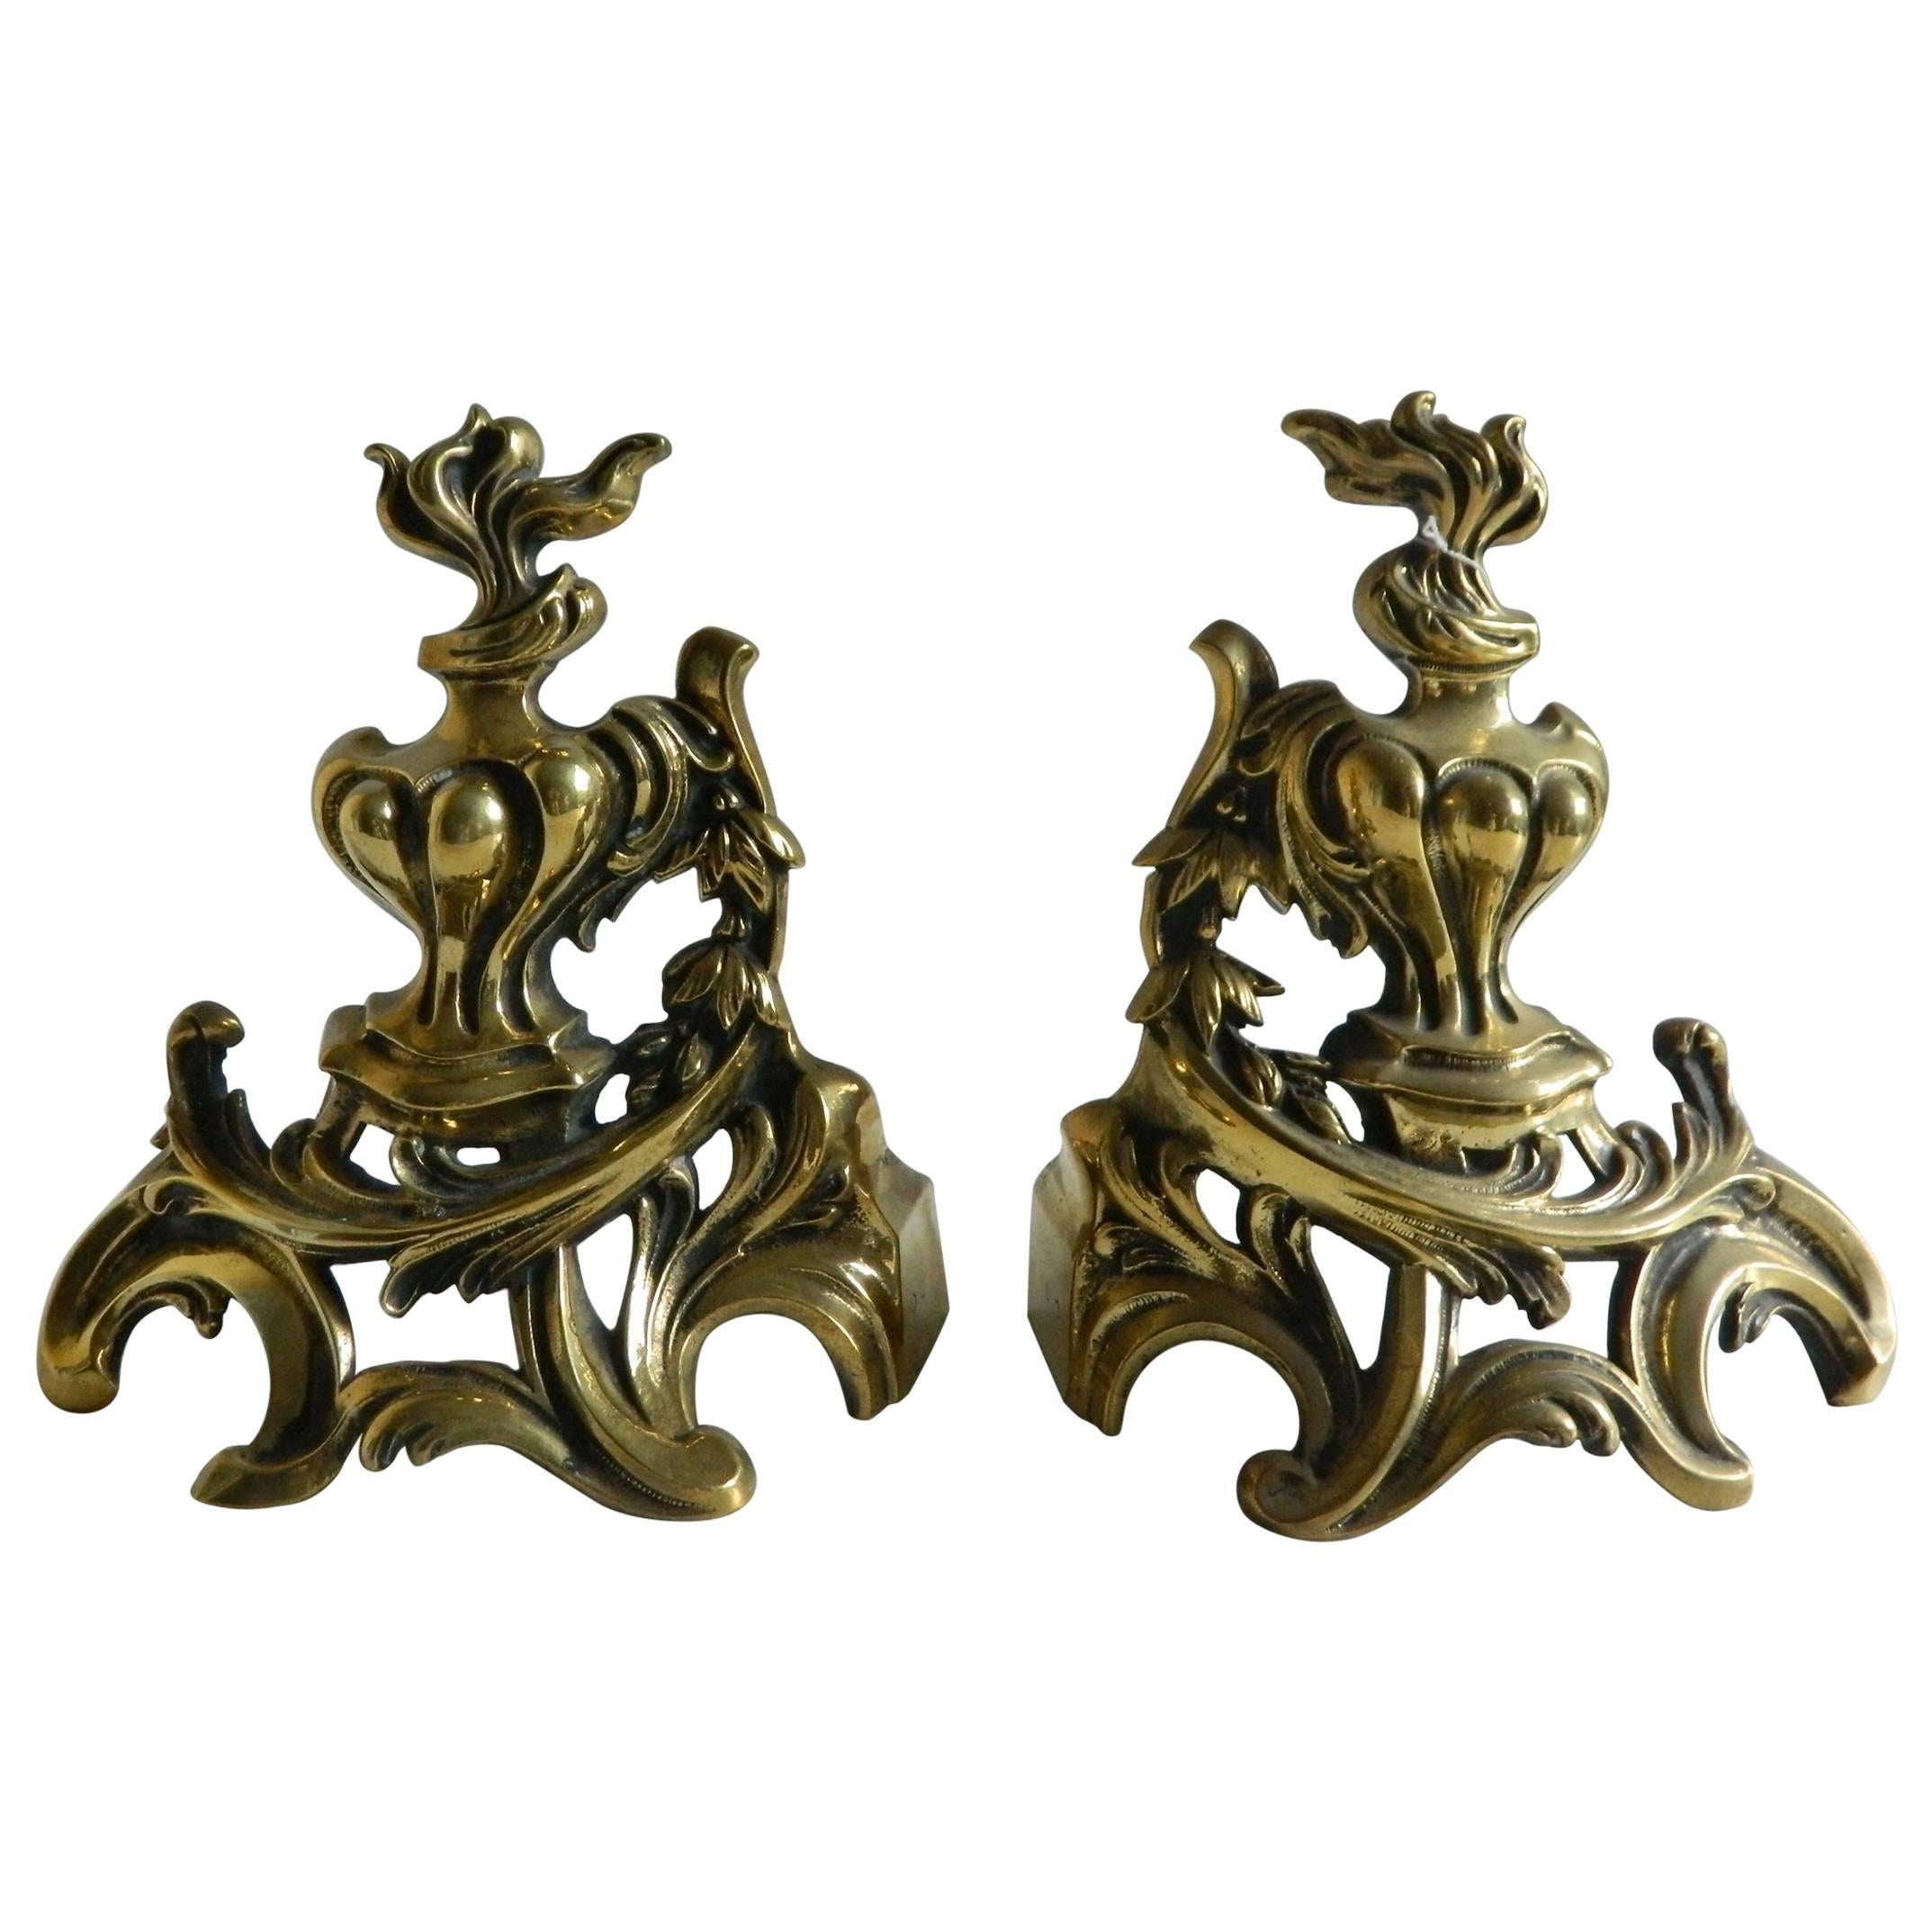 Pair of Brass Small Chenets or Andirons with Flame Finials, 19th Century For Sale